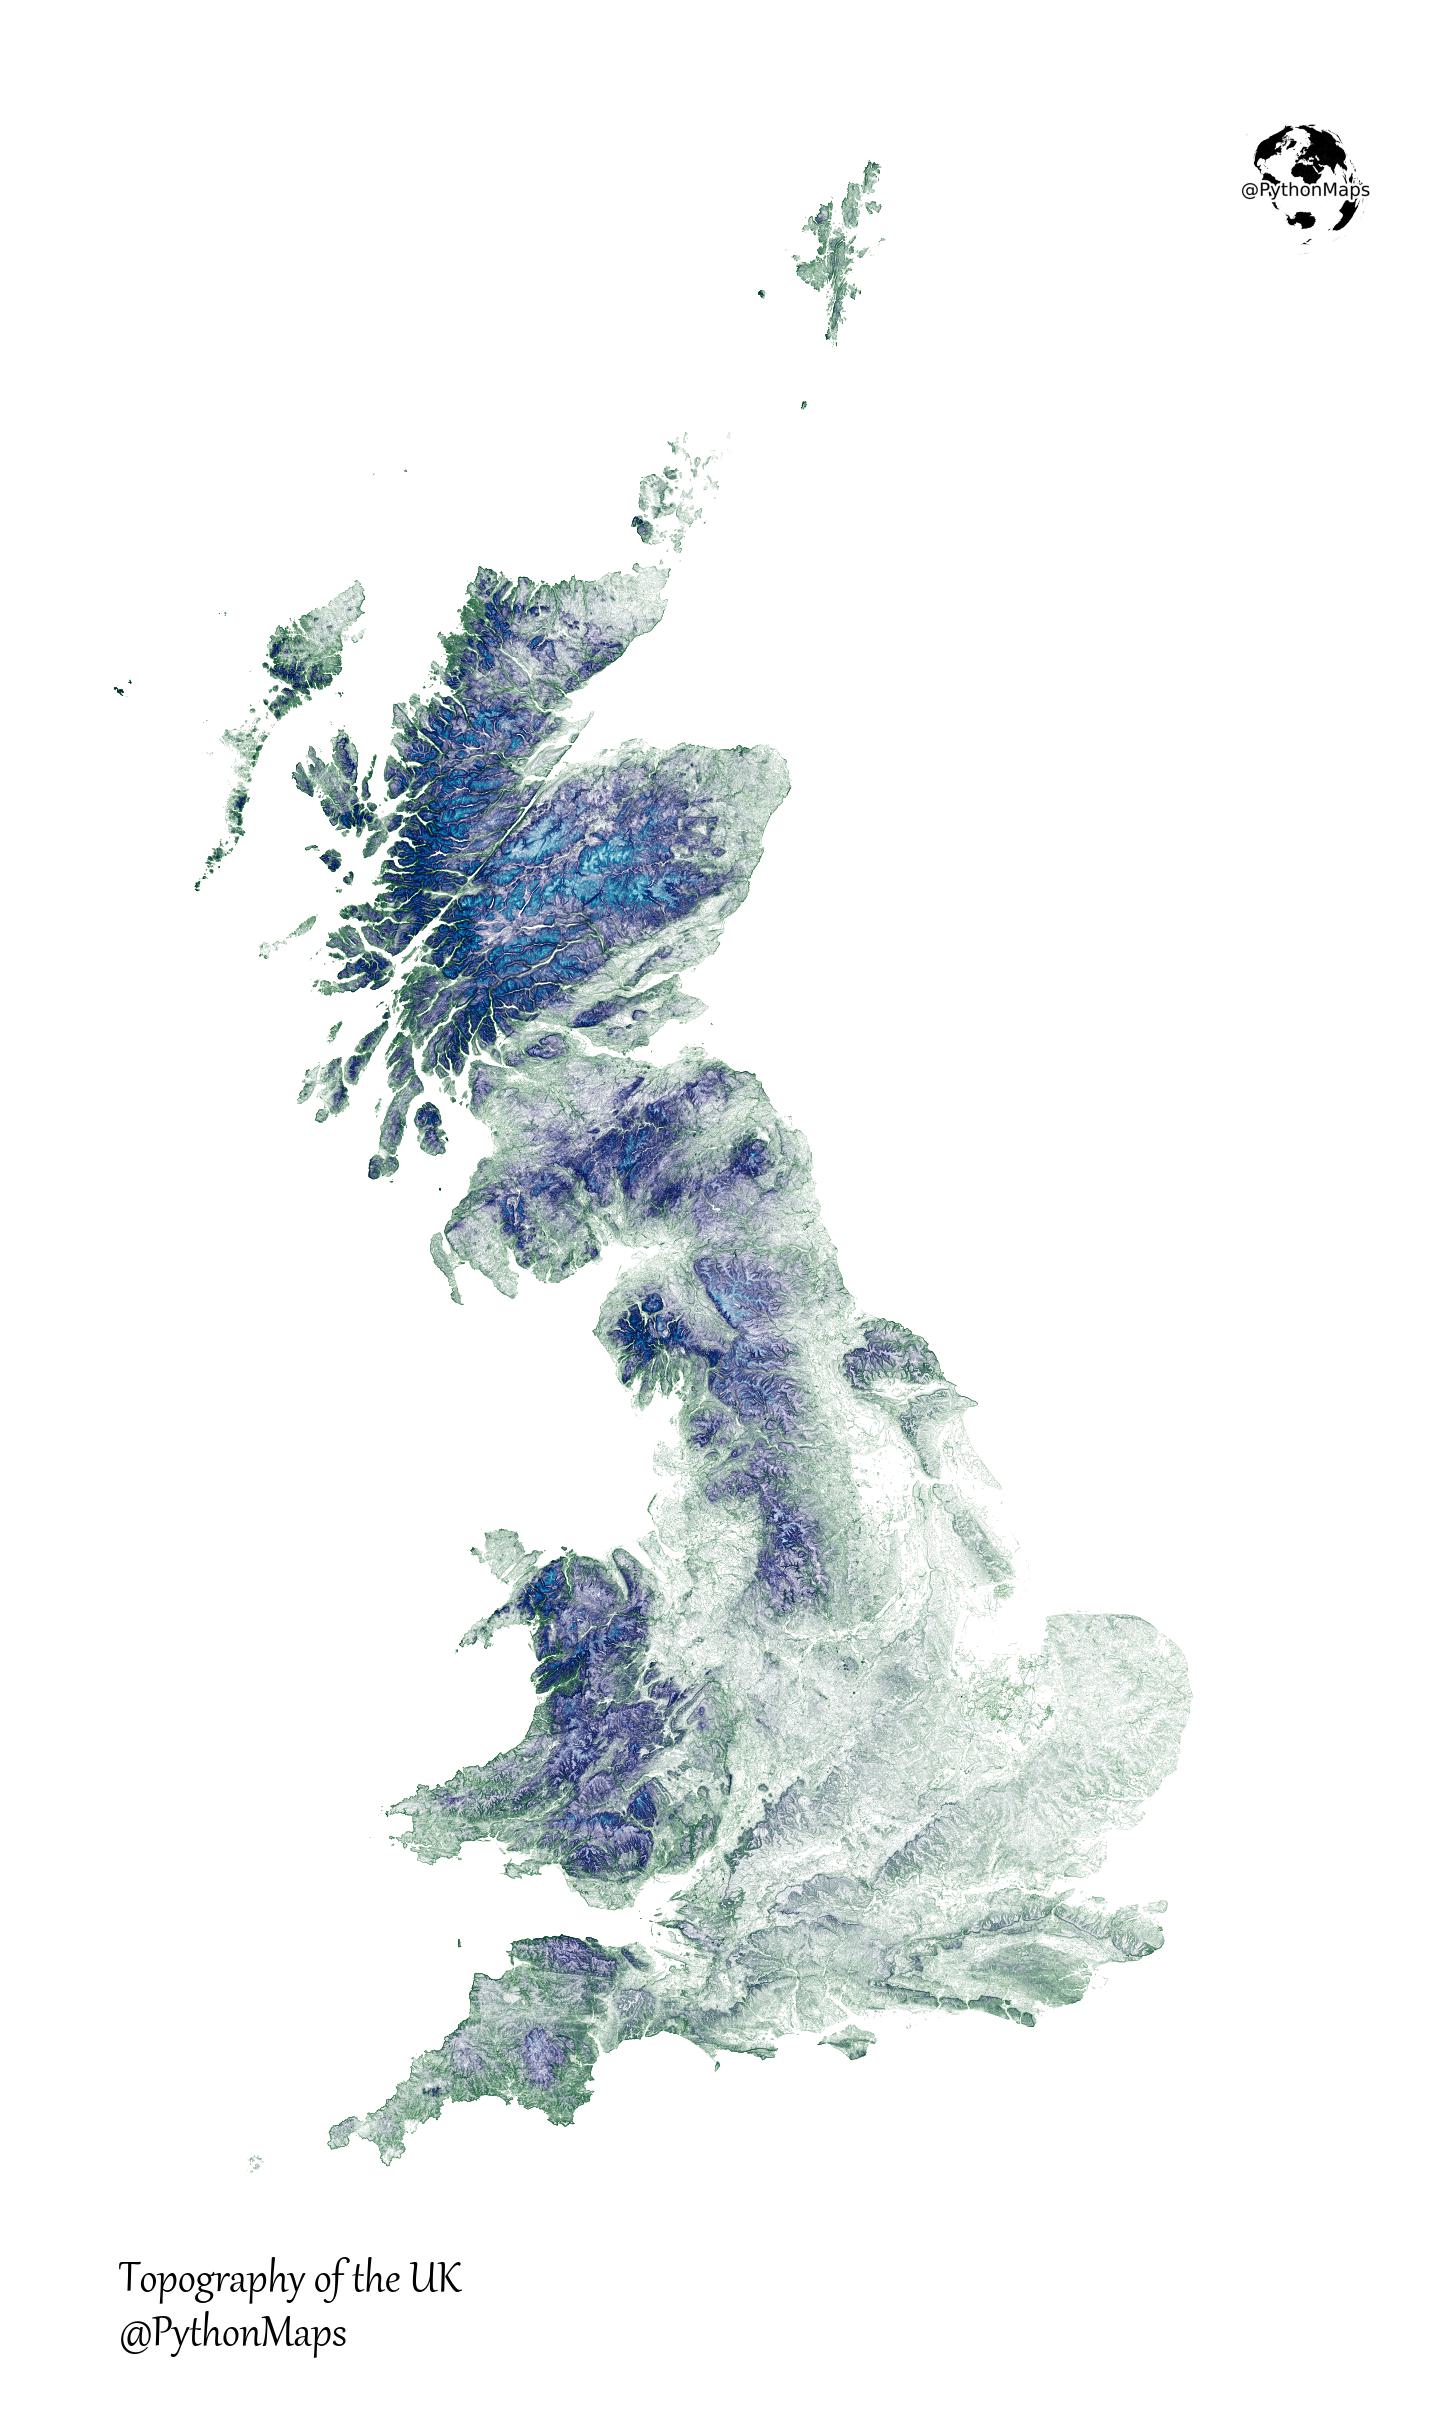 The Topography of the UK